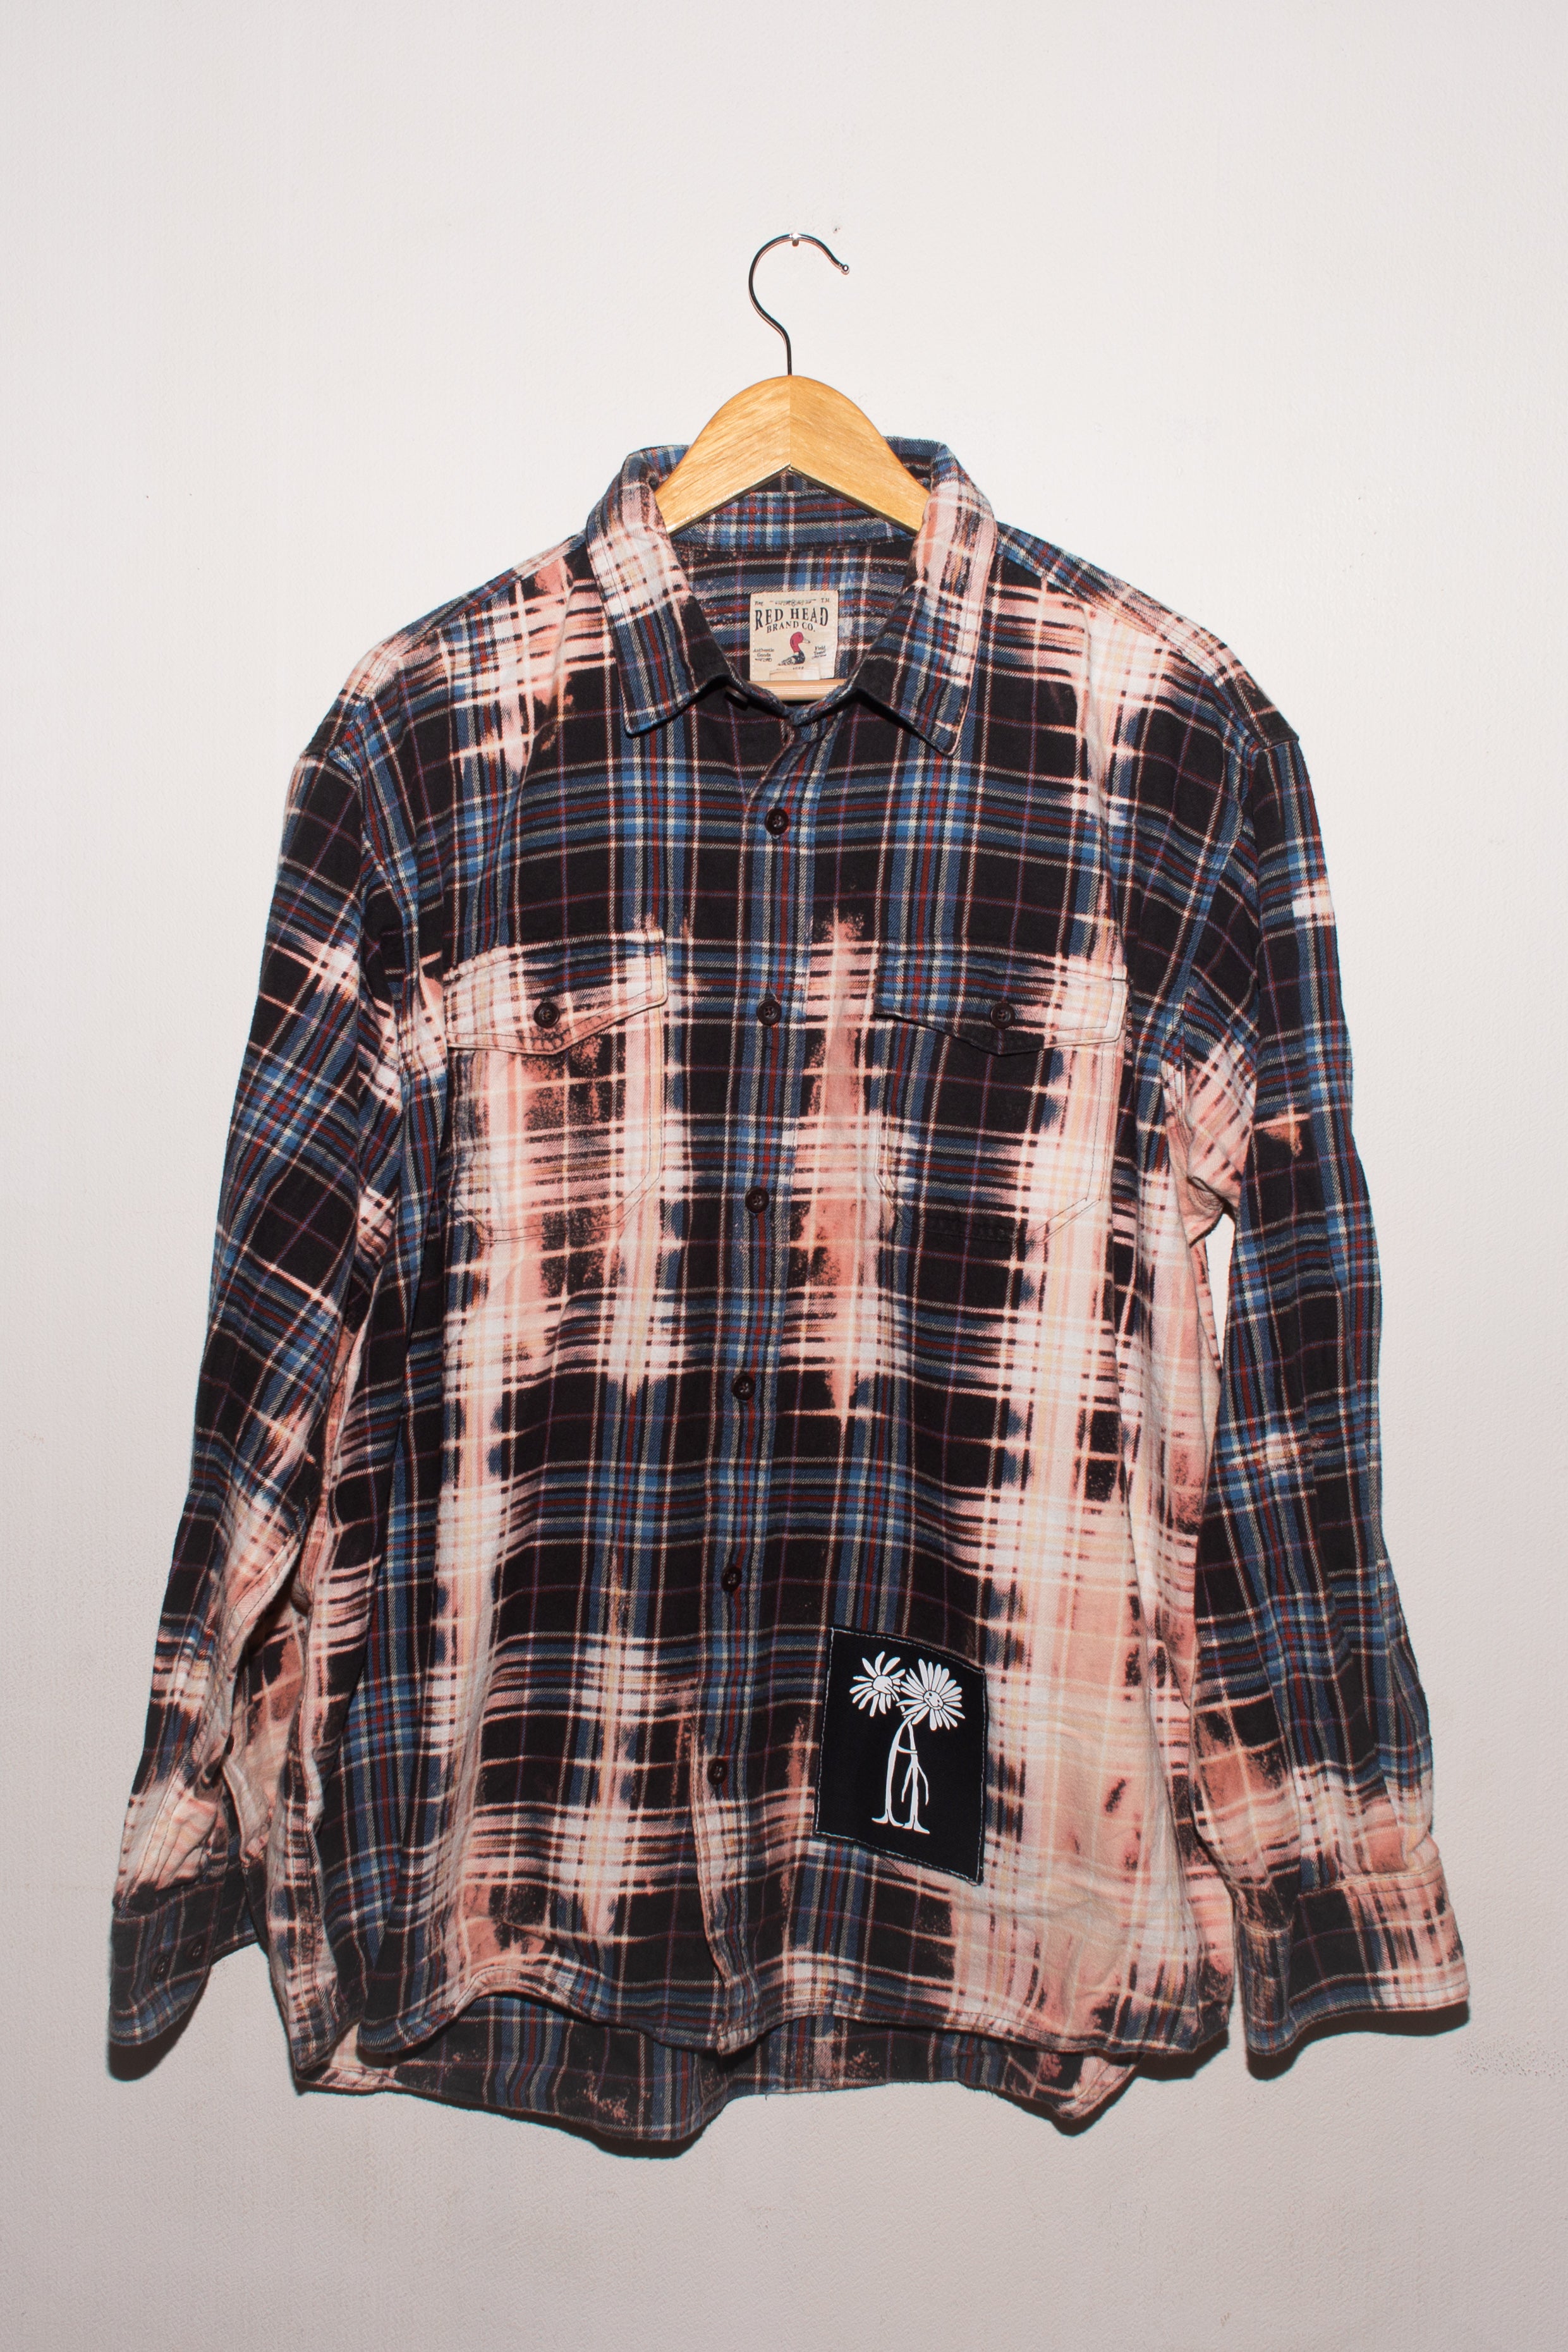 Red Head flannel